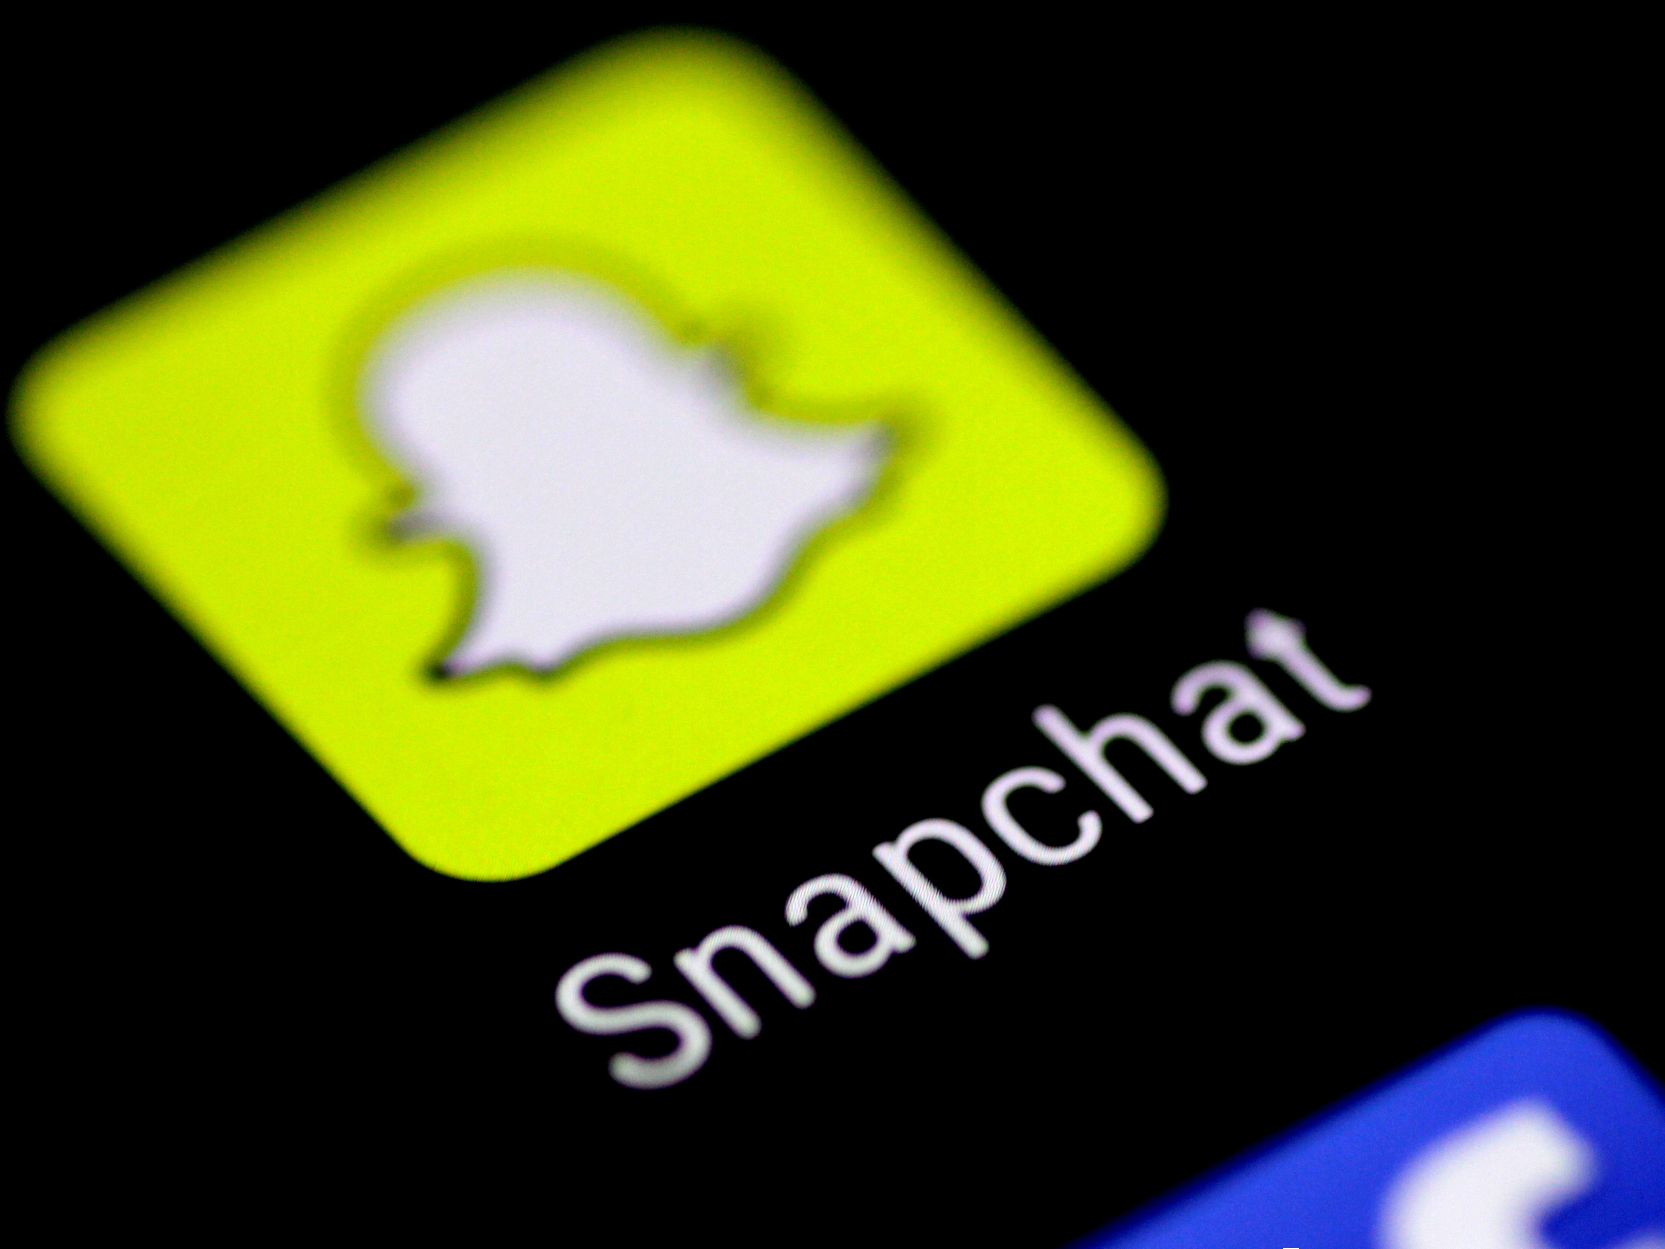 When people search Snapchat for drug-related key words, they'll now be able to read about the dangers of drugs. (Thomas White / Reuters)